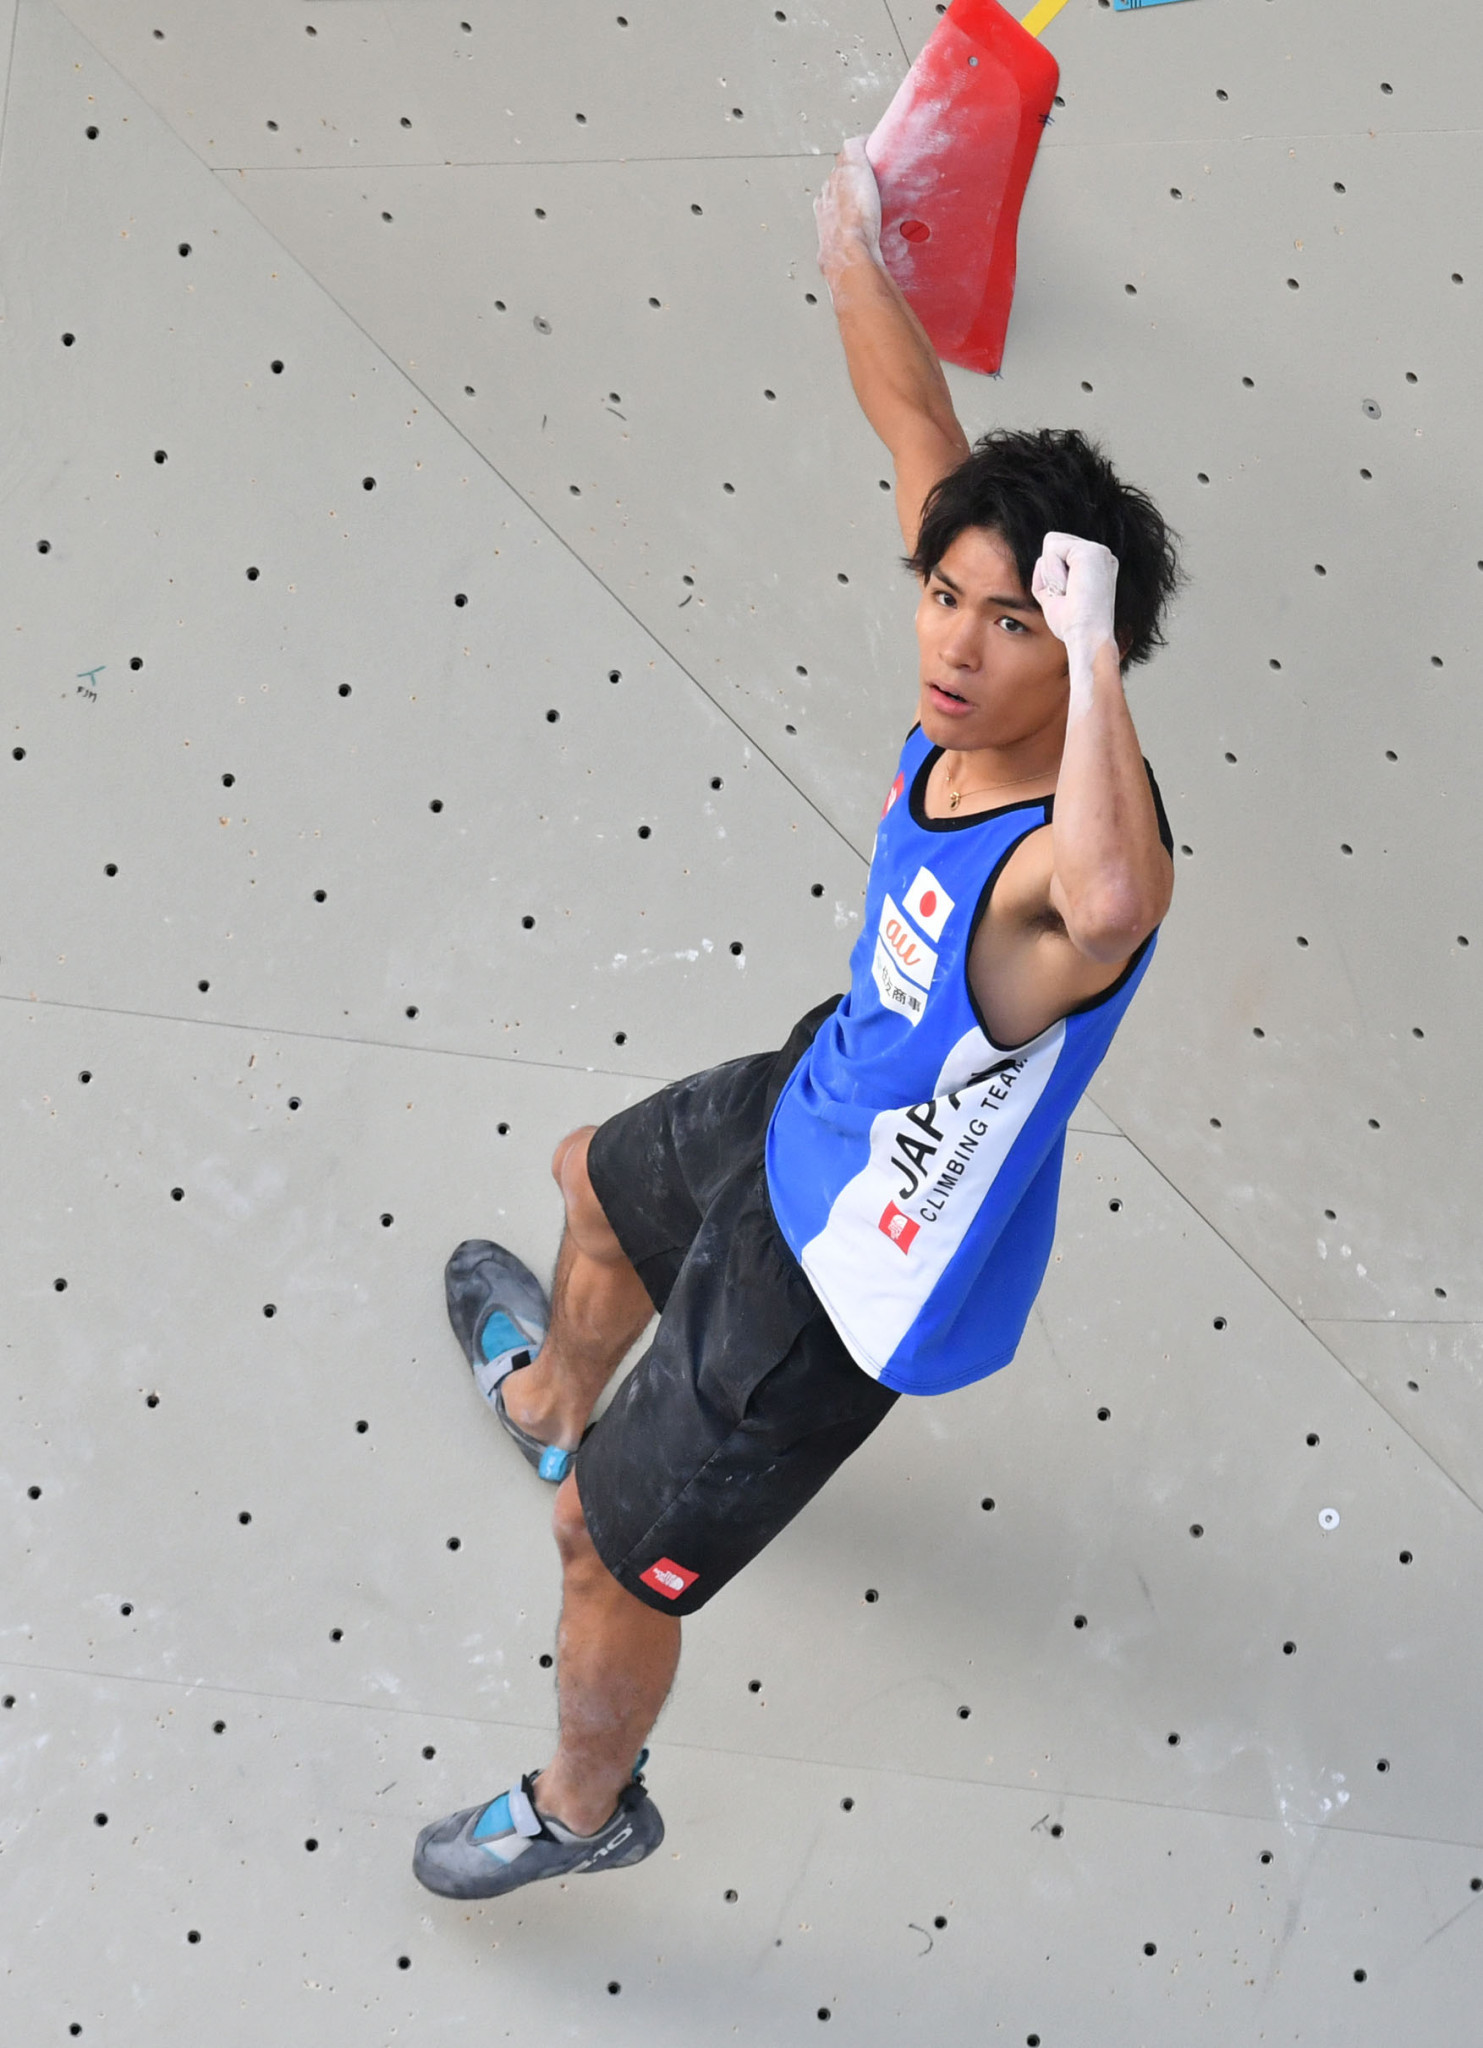 Japan's Tomoa Narasaki won the men's competition at today's IFSC Bouldering World Cup in Wujiang, China ©Getty Images